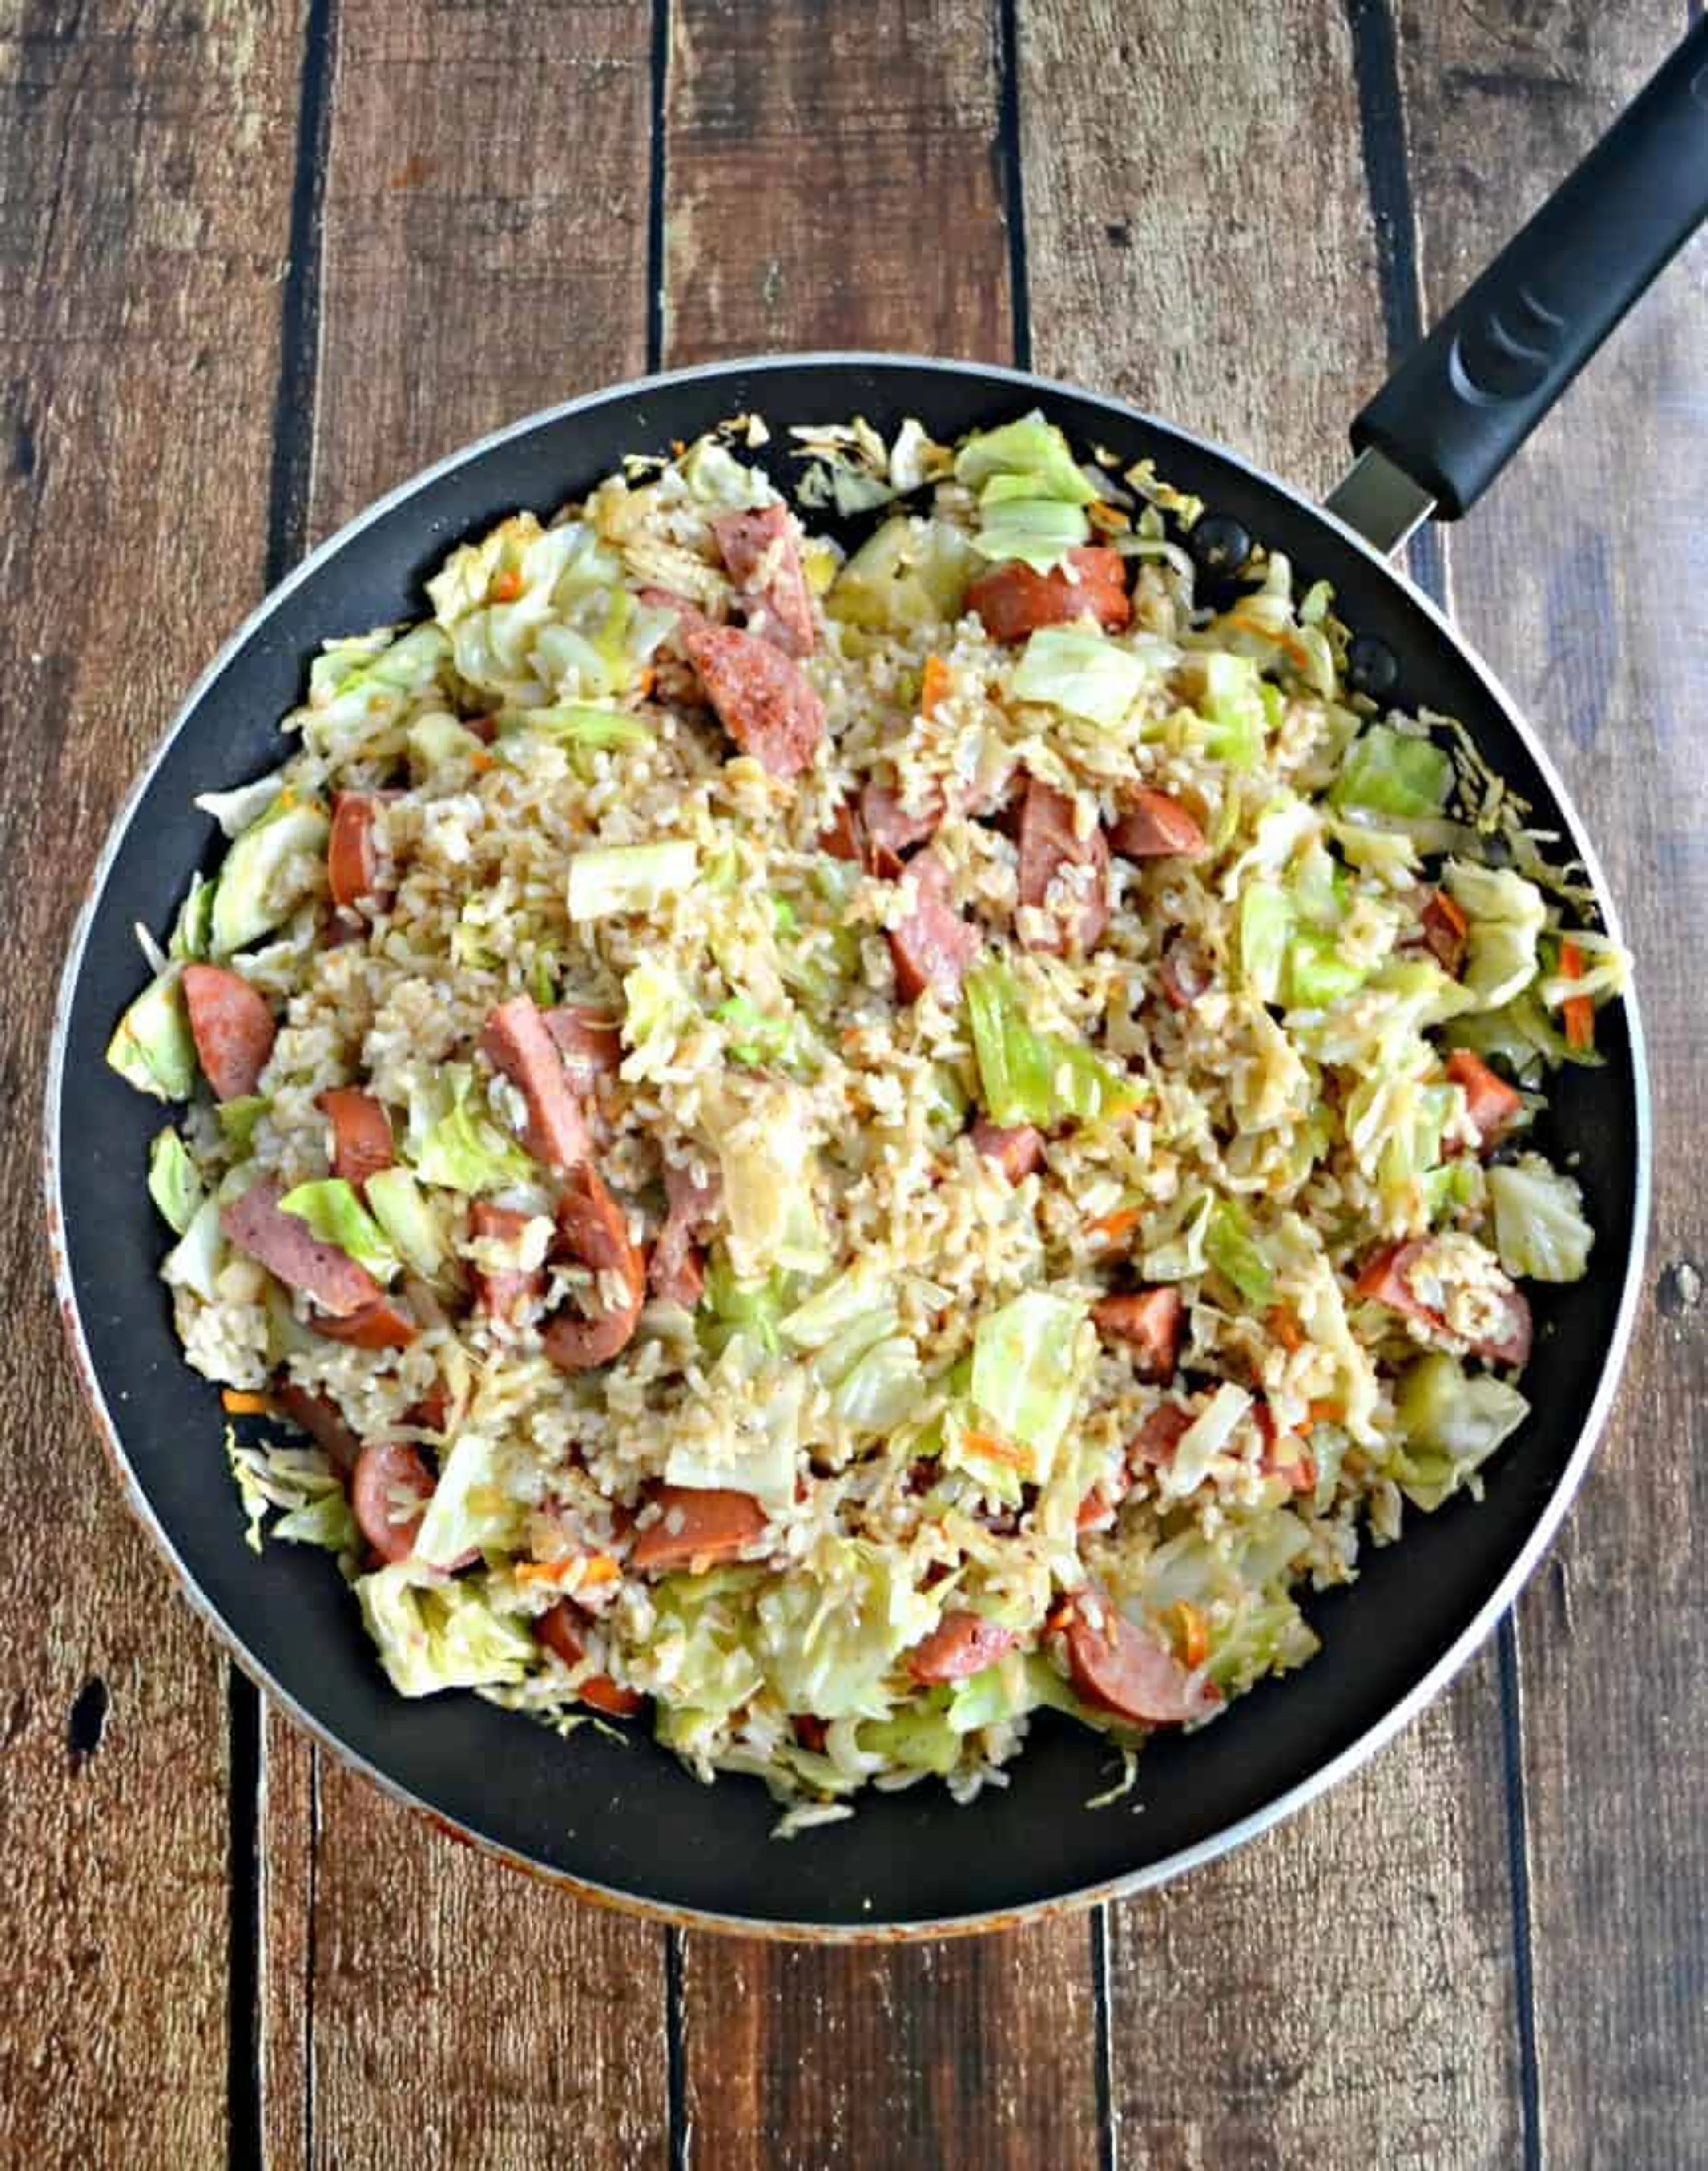 Kielbasa and Cabbage Skillet with Buttered Rice